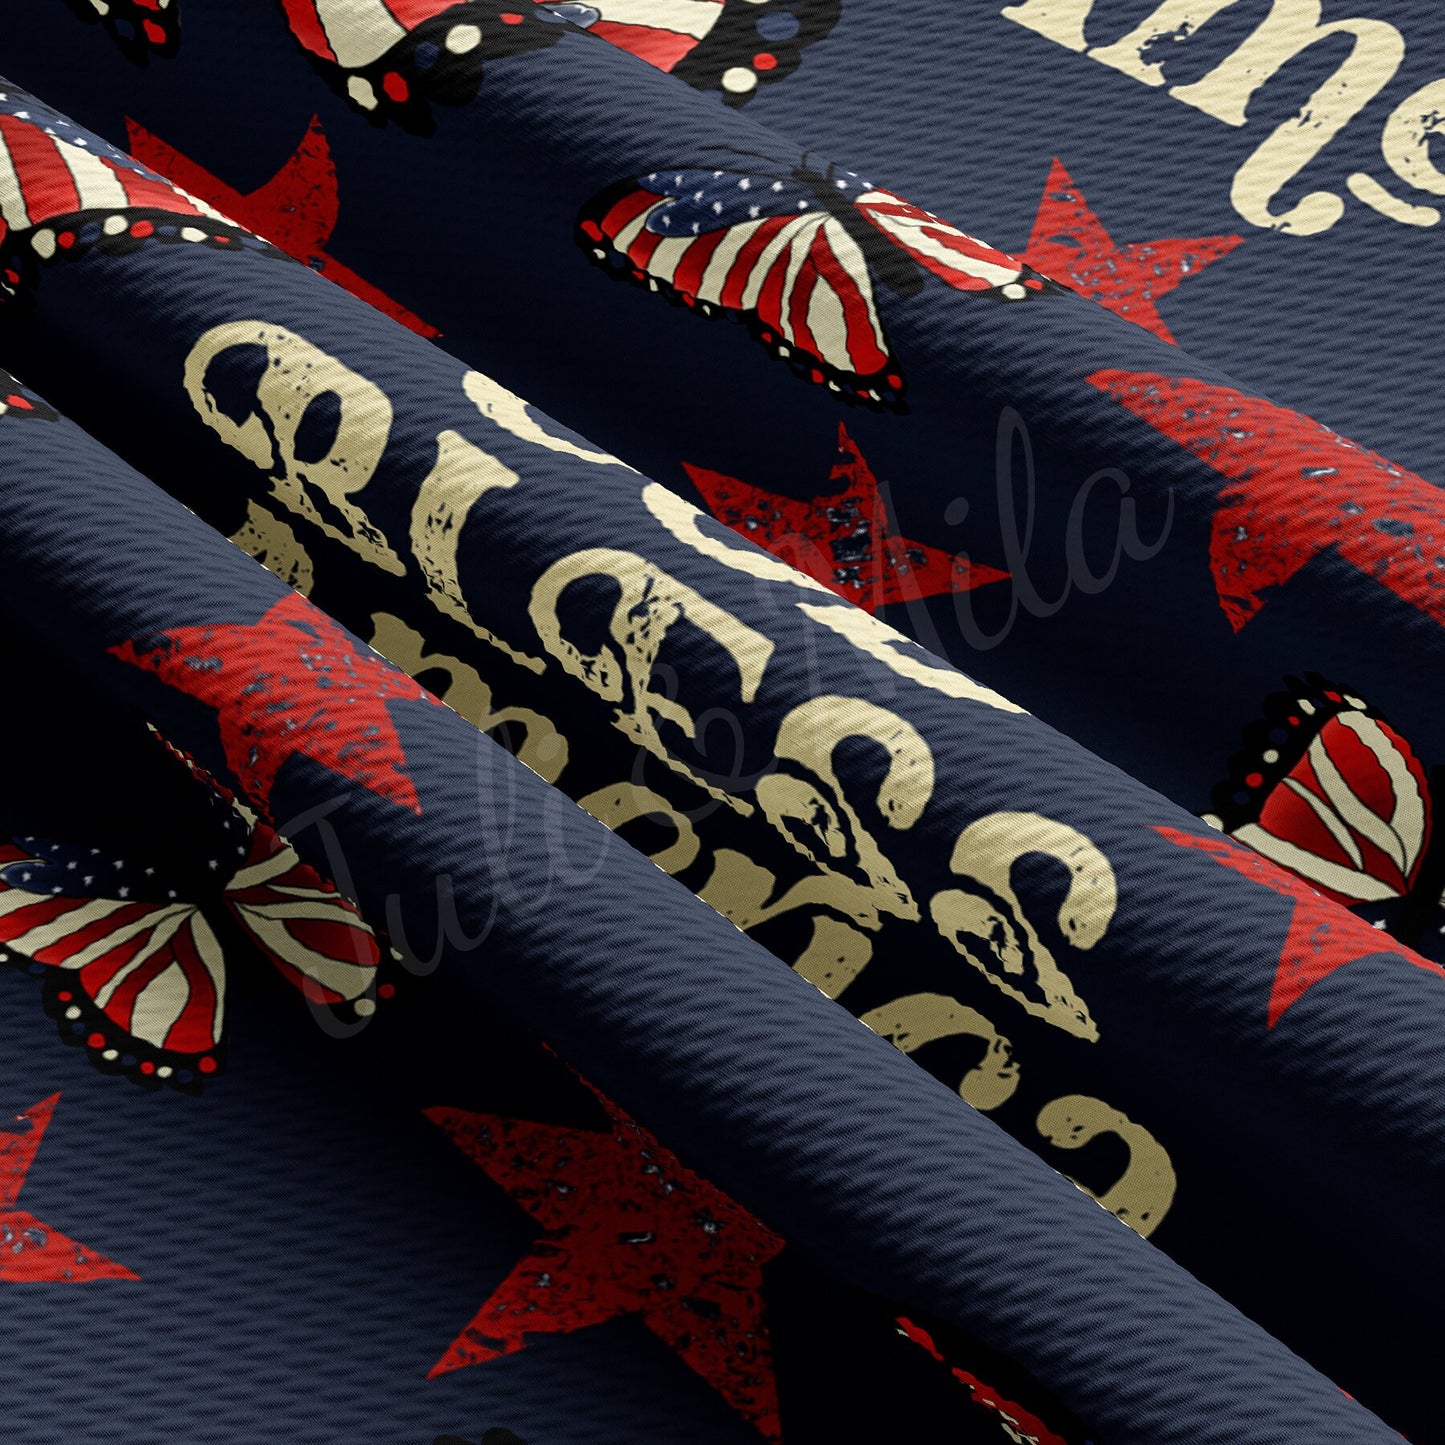 God Bless America 4th of July Bullet Textured Fabric  AA1501